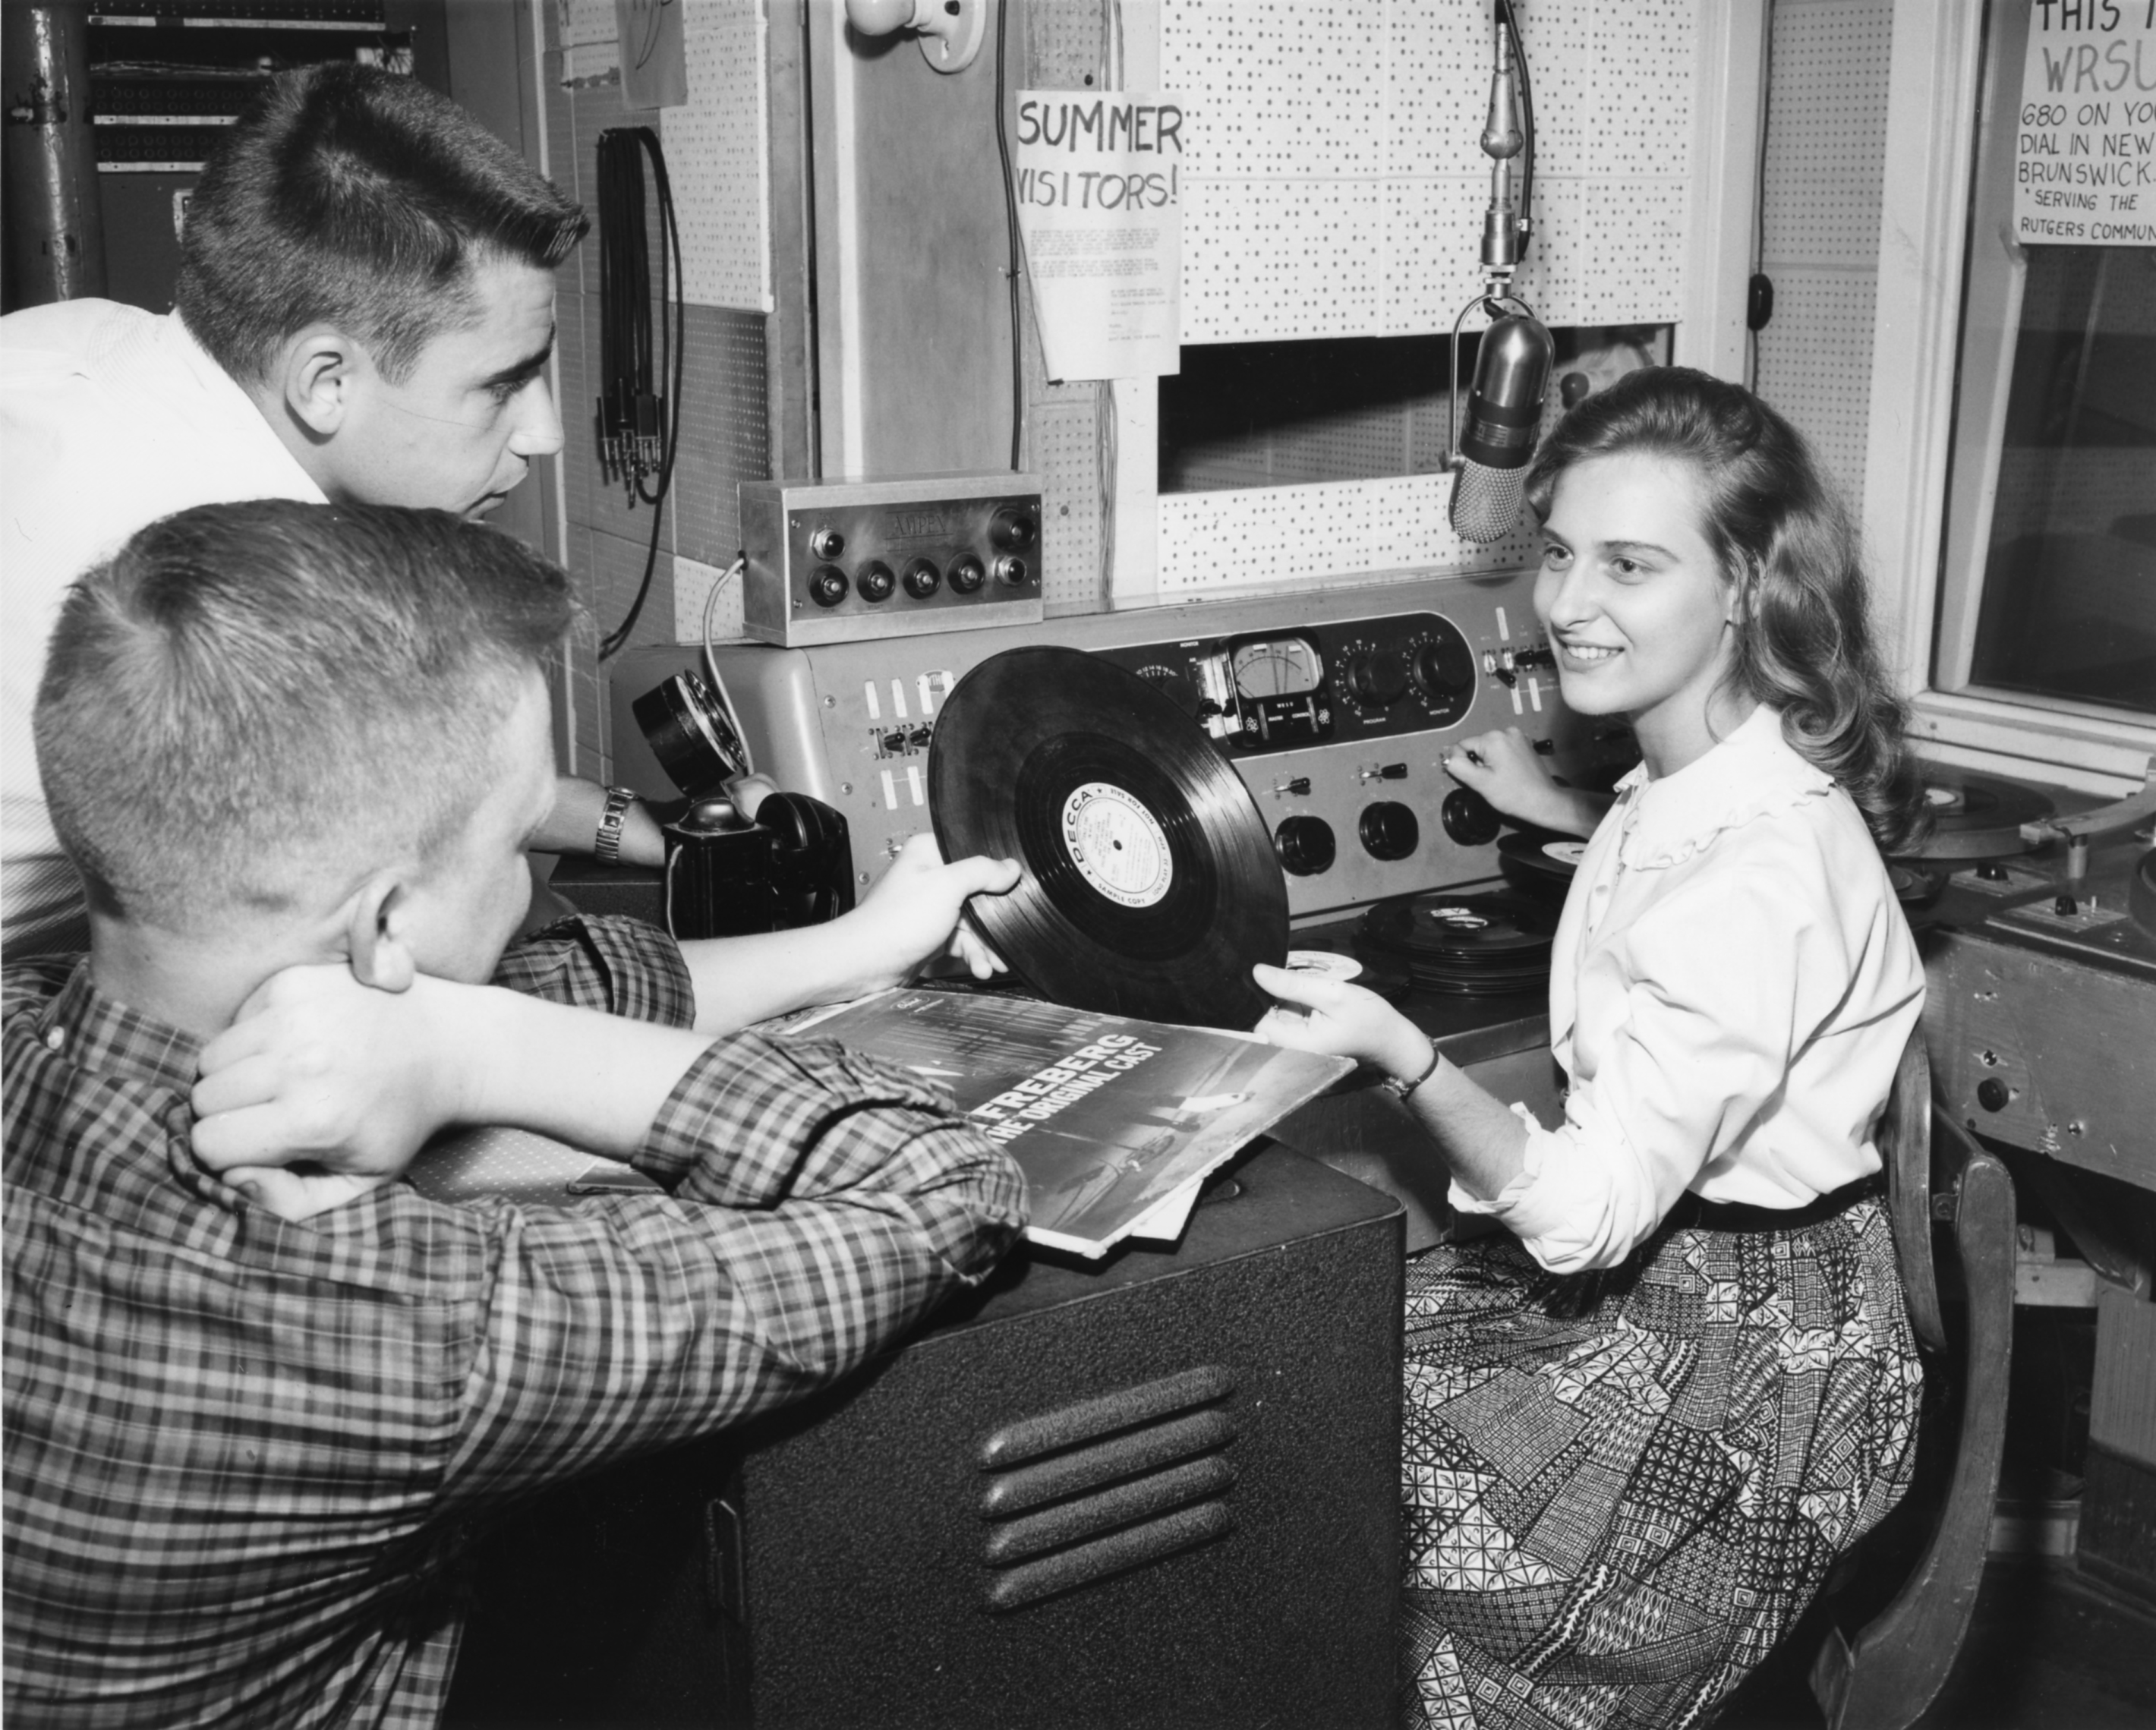 From RUTGERS NEWS SERVICE, year unknown – DOUGLASS DISC JOCKEY: Nineteen year old Ann Sudia of Linden, a sophomore at Douglass College, the women’s division of Rutgers University, spins a request tune over WRSU – the student operated radio outlet in New Brunswick, as two staff members look on approvingly.